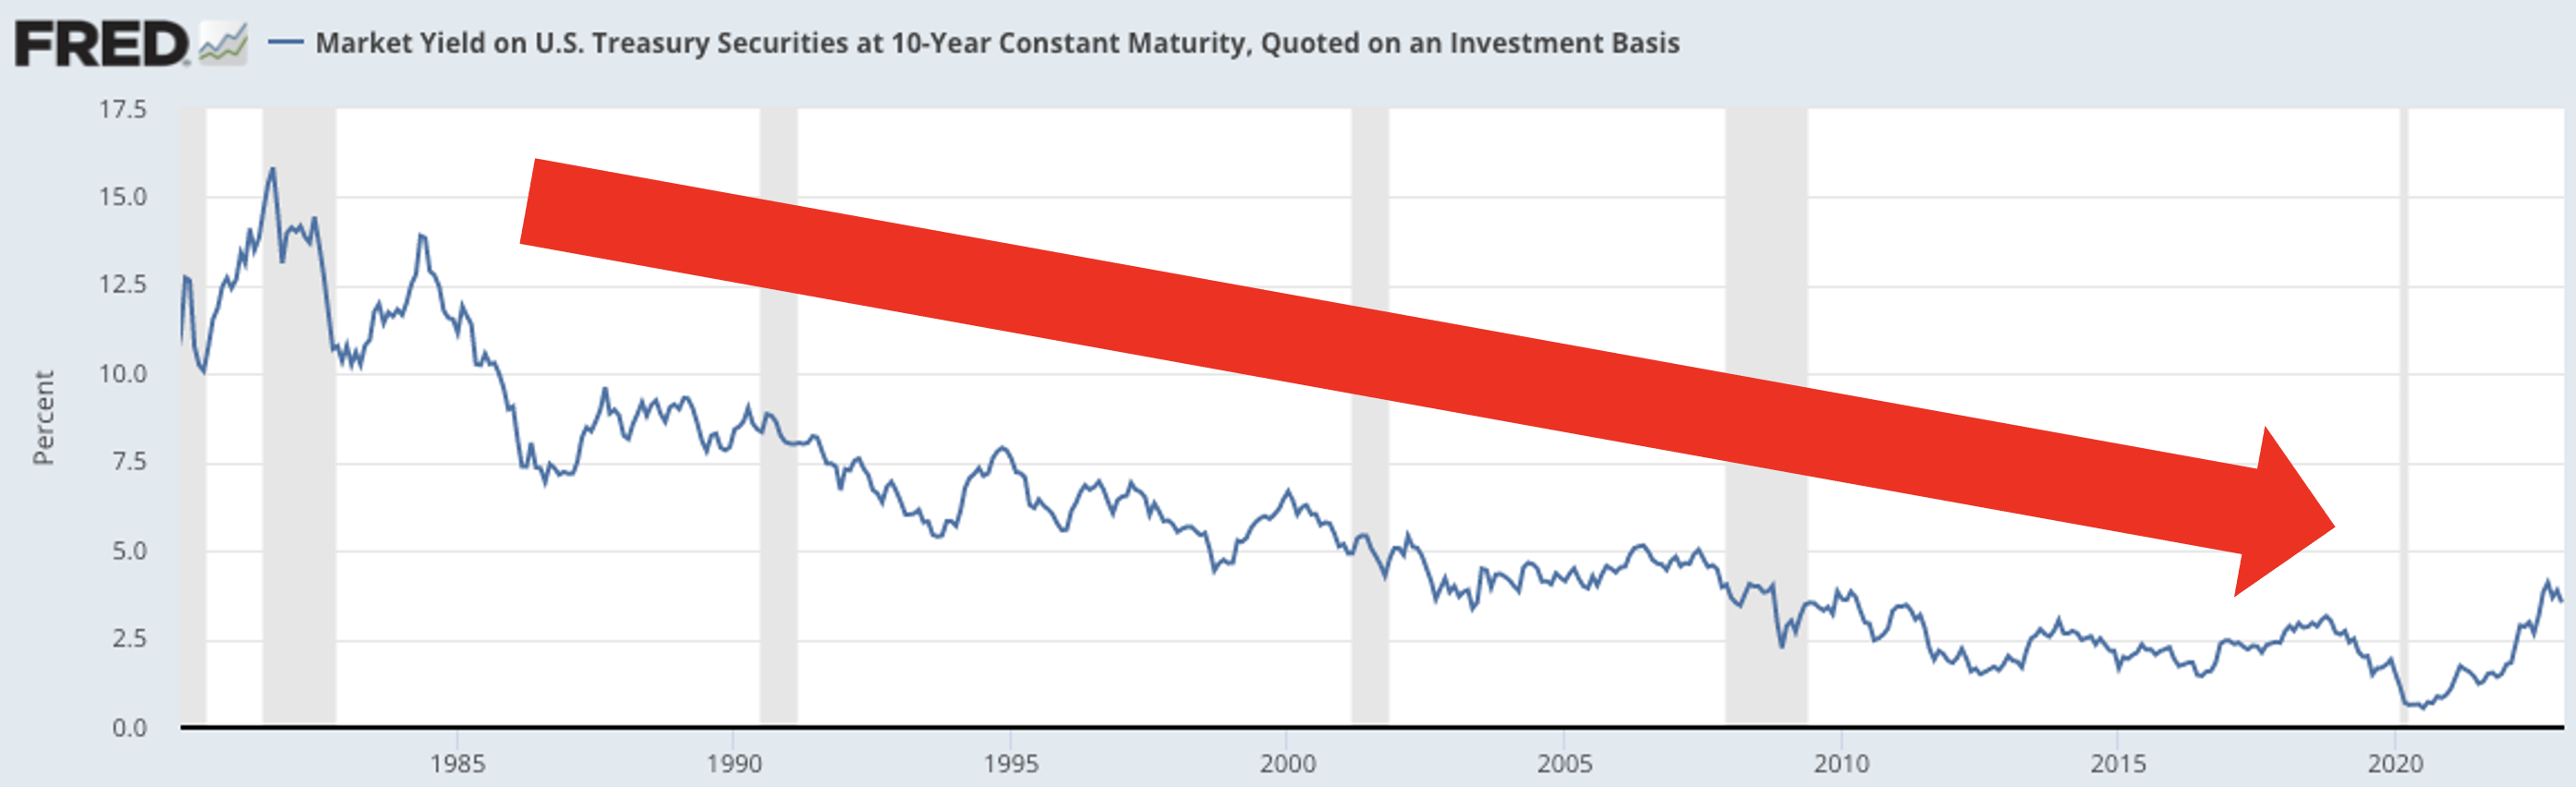 Market Yield on U.S. Treasury Securities at 10-Year Constant Maturity, Quoted on an Investment Basis (DGS10)